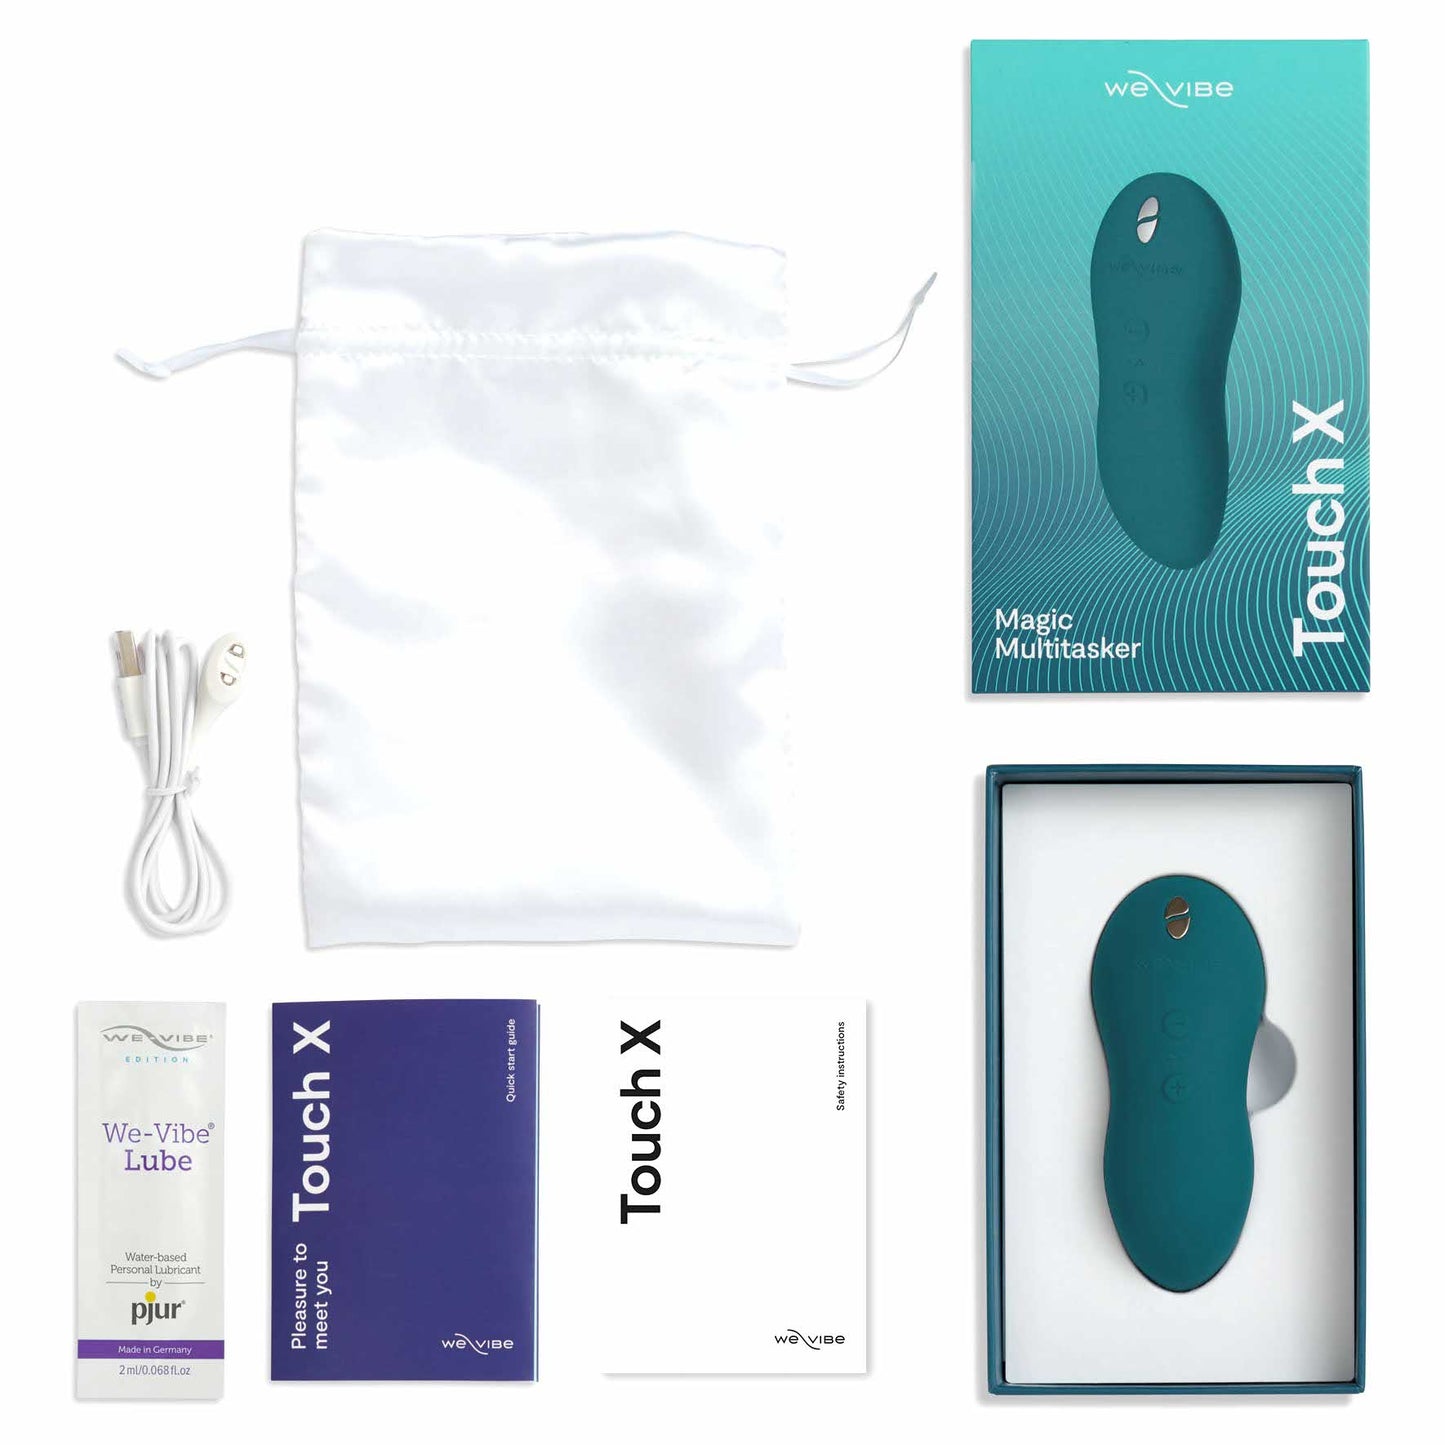 everything included with the we-vibe touch x powerful mini massager wvsntcsg6 green velvet